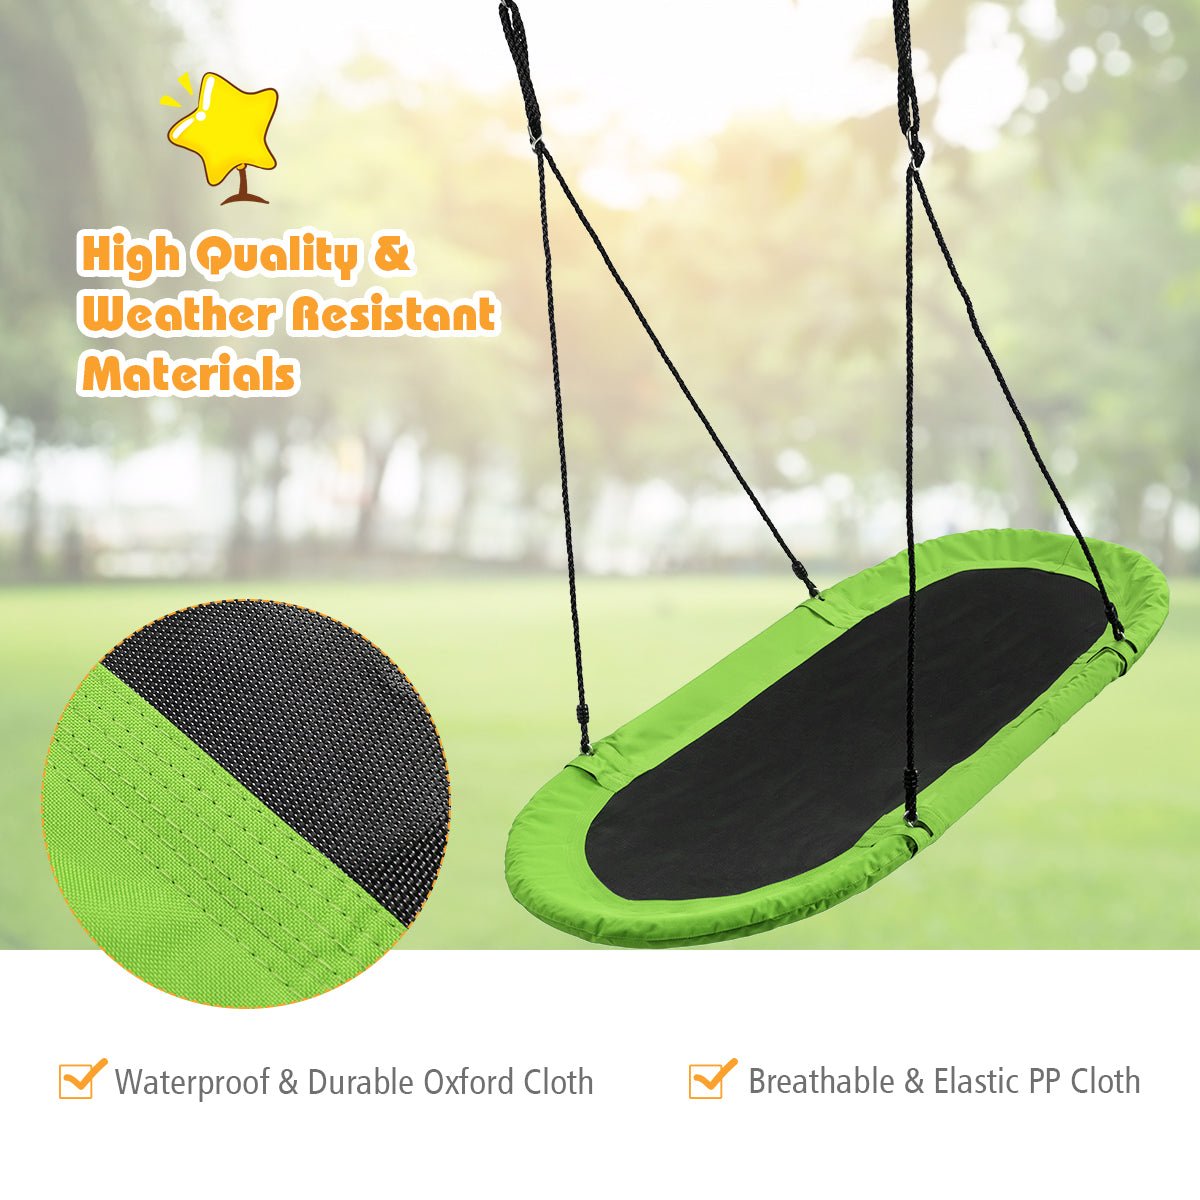 Outdoor Oval Tree Swing: Adjustable Hanging Ropes for Flying Fun